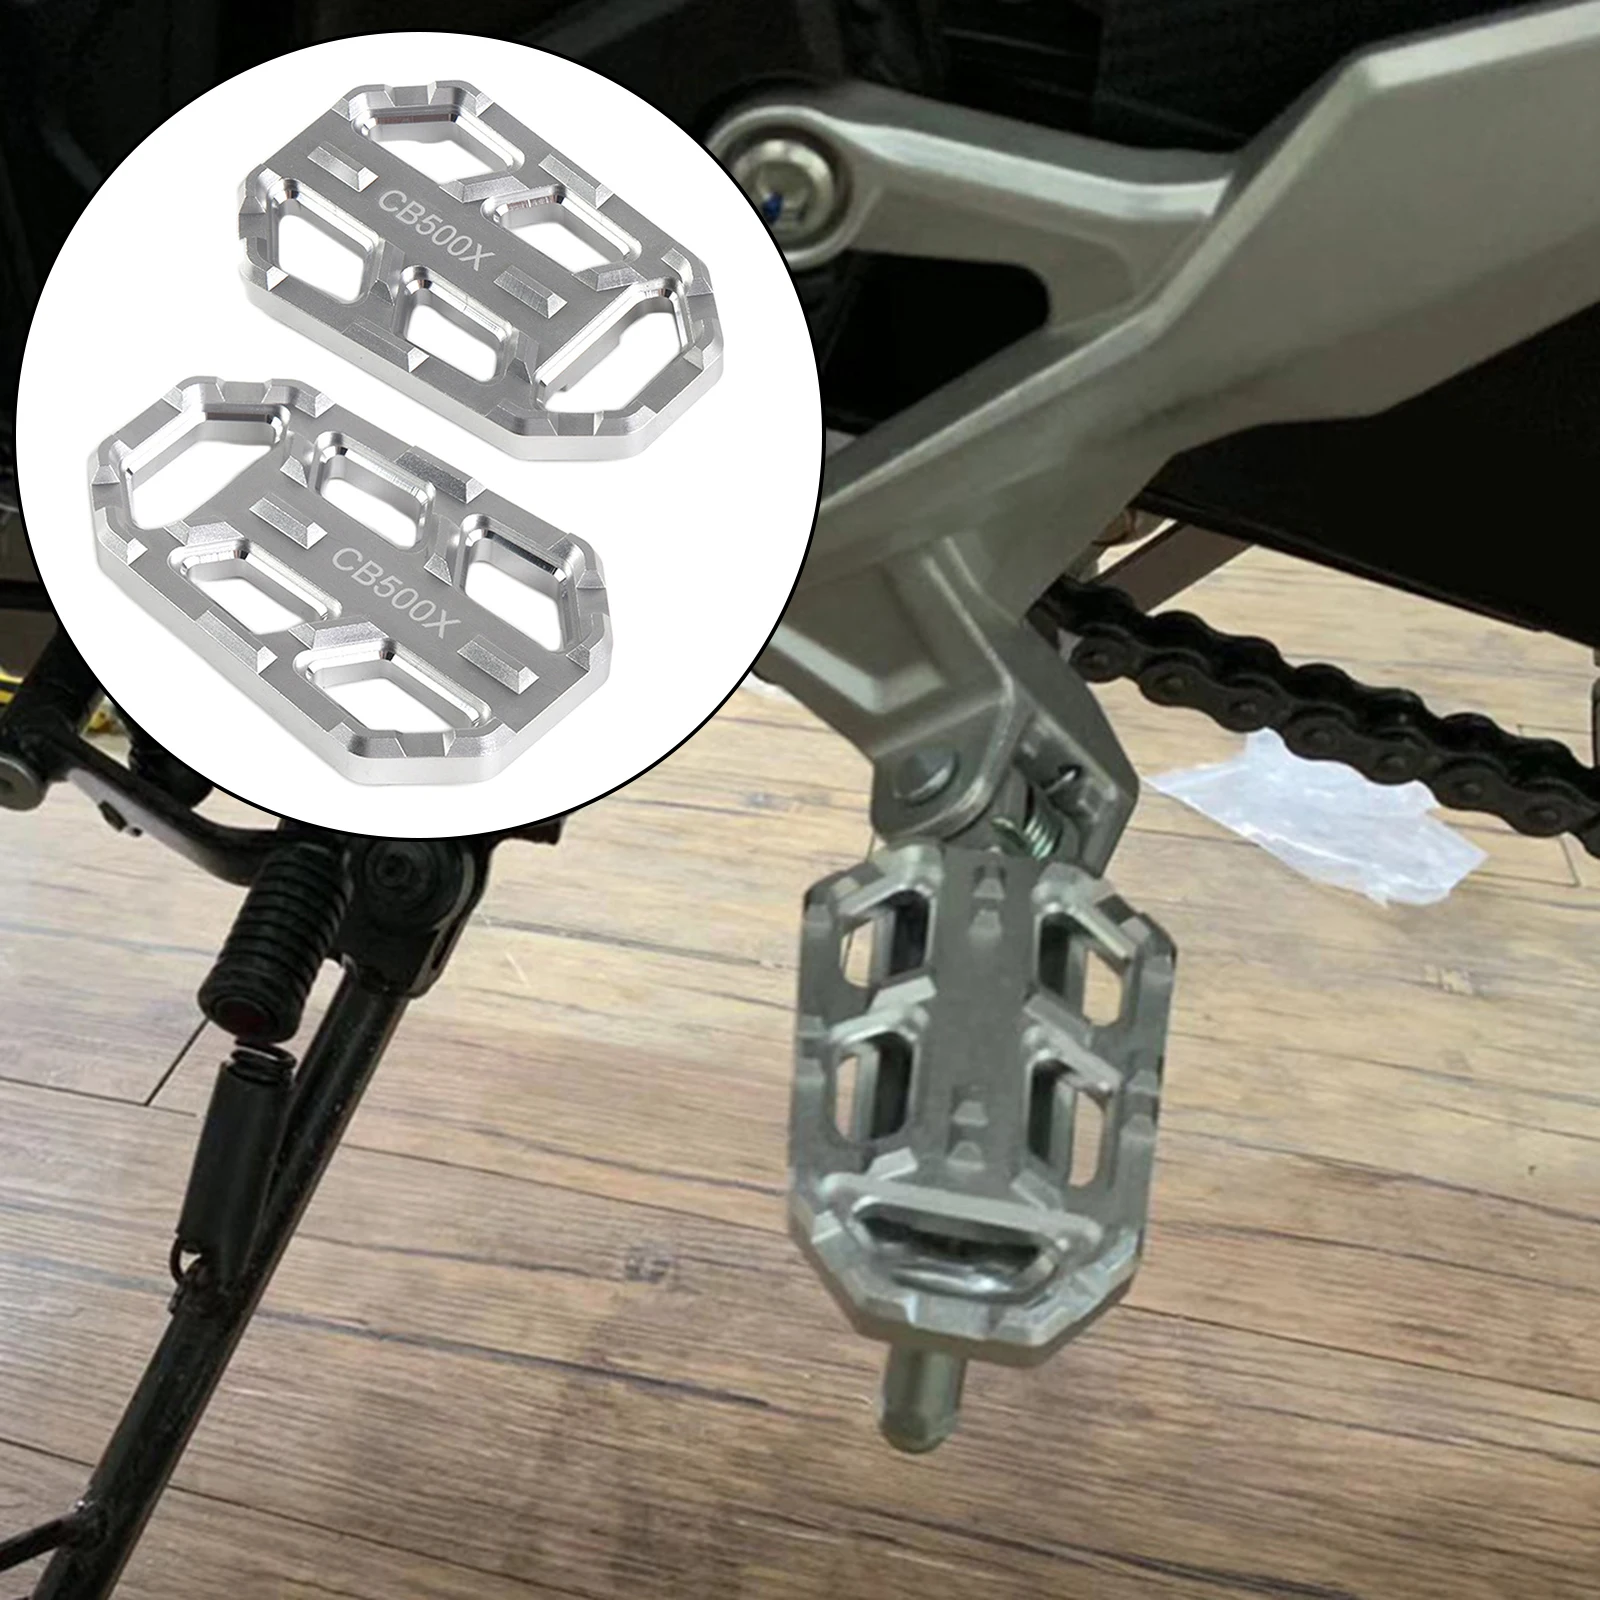 Pedals Rest Footrests for Honda NC700S, Specialised Fittings, High Quality Spare Parts